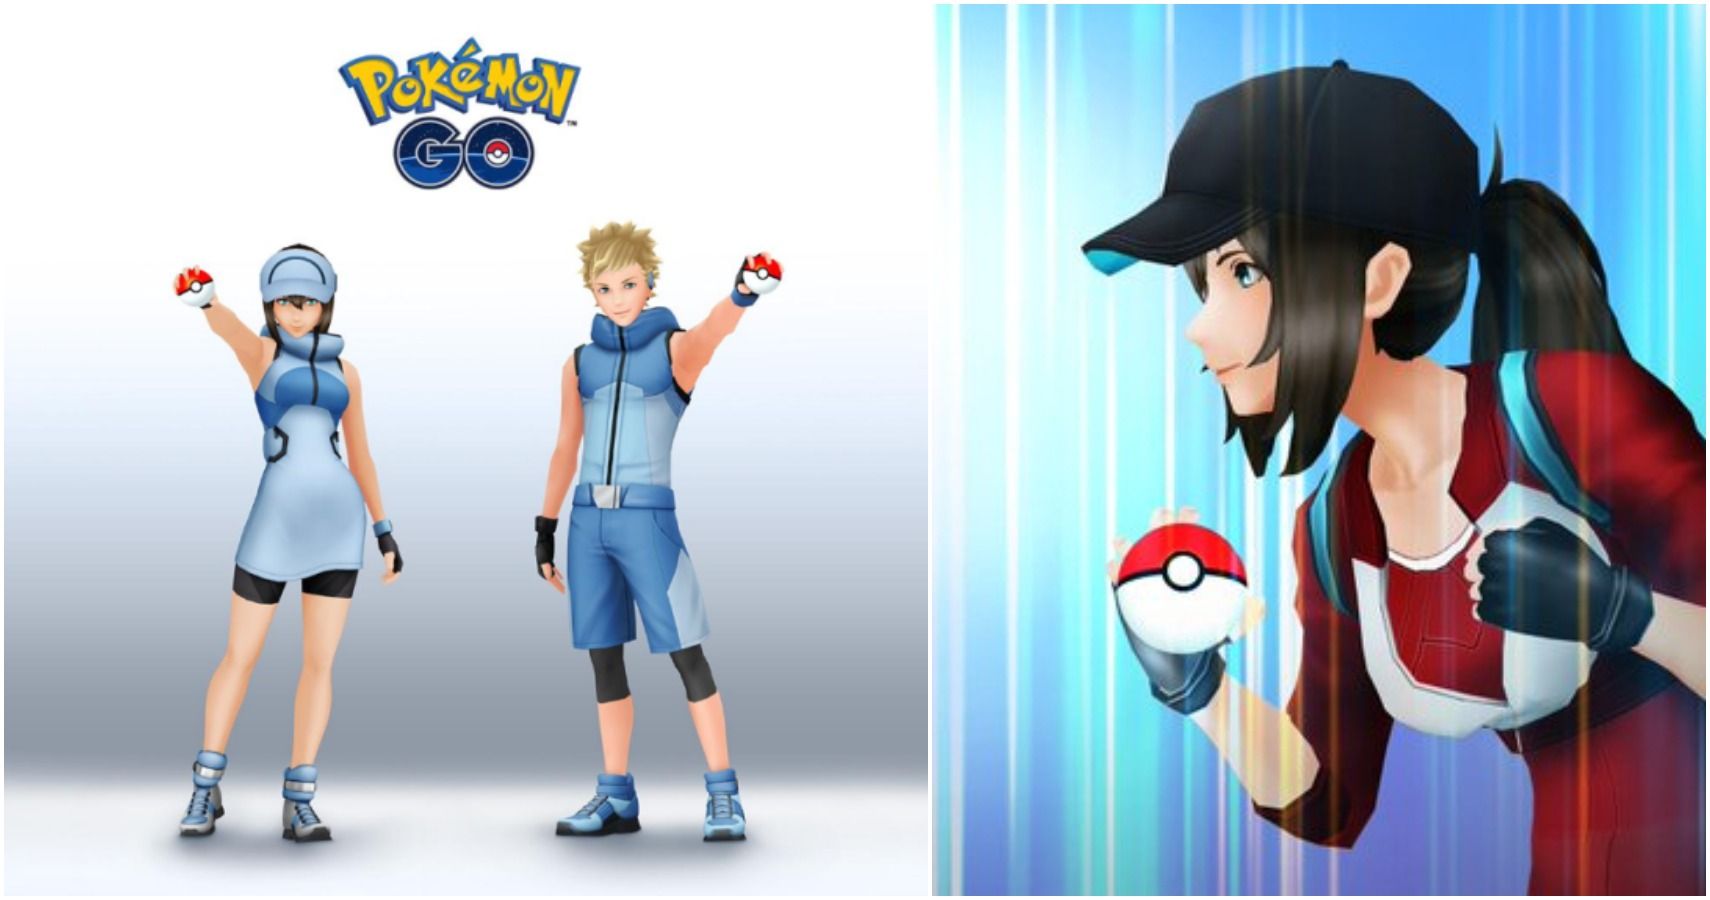 𝐏𝐨𝐤𝐞𝐦𝐨𝐧 𝐆𝐎 𝐍𝐞𝐰𝐬  on X: Trainers, The Pokemon